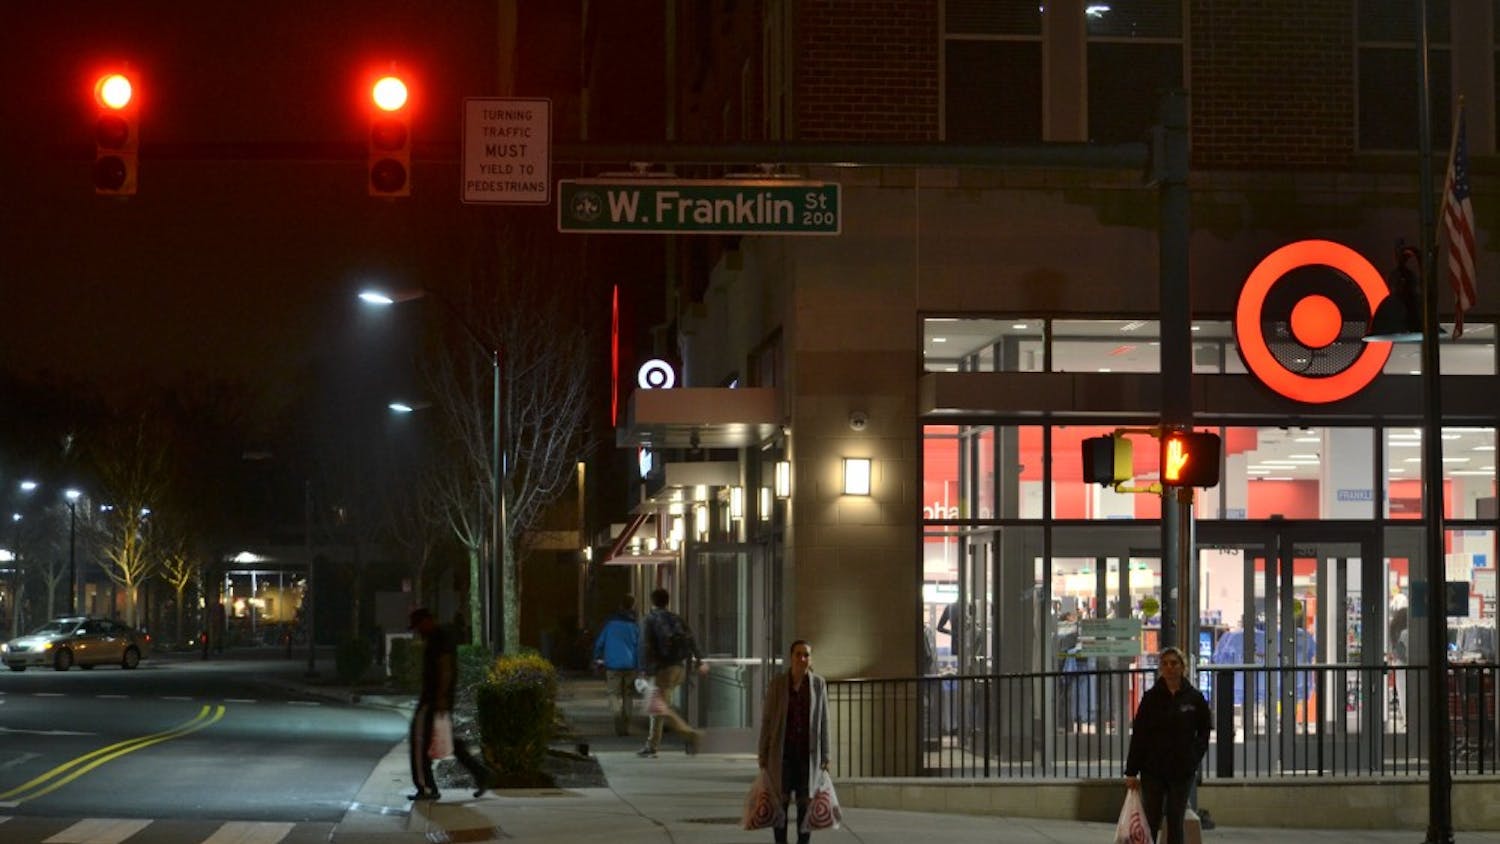 Franklin street remains busy as Chapel Hill residents and students make trips to Target.